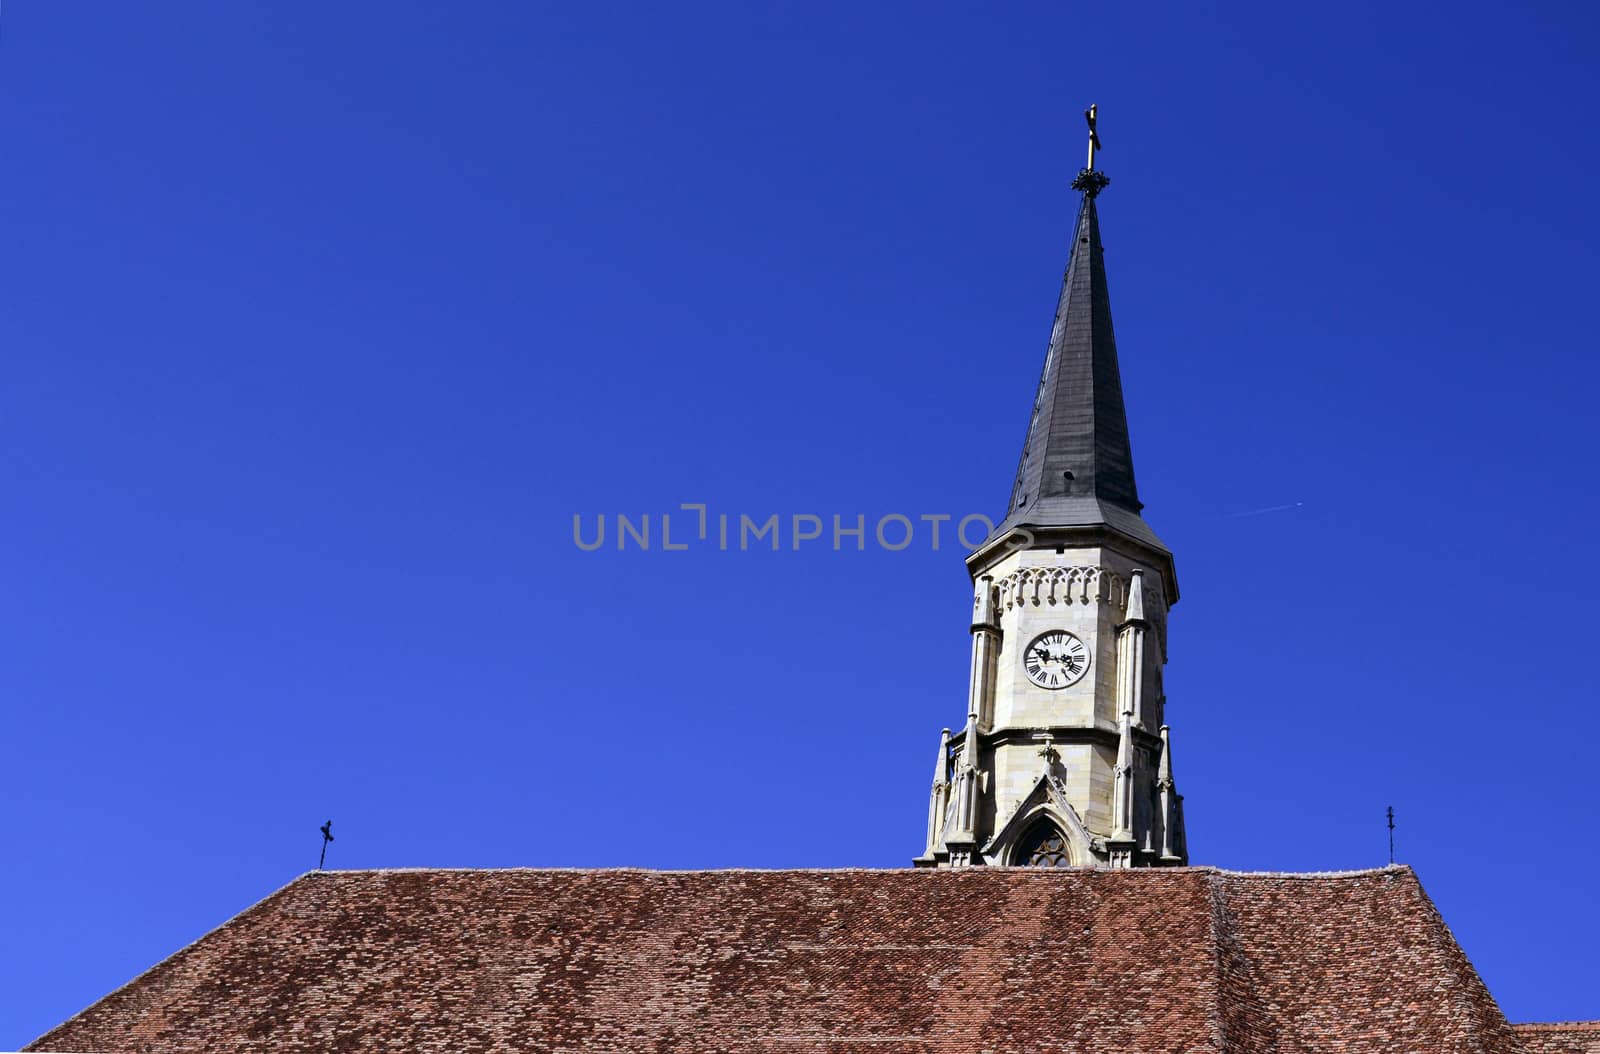 Old church roof with clock tower by hibrida13